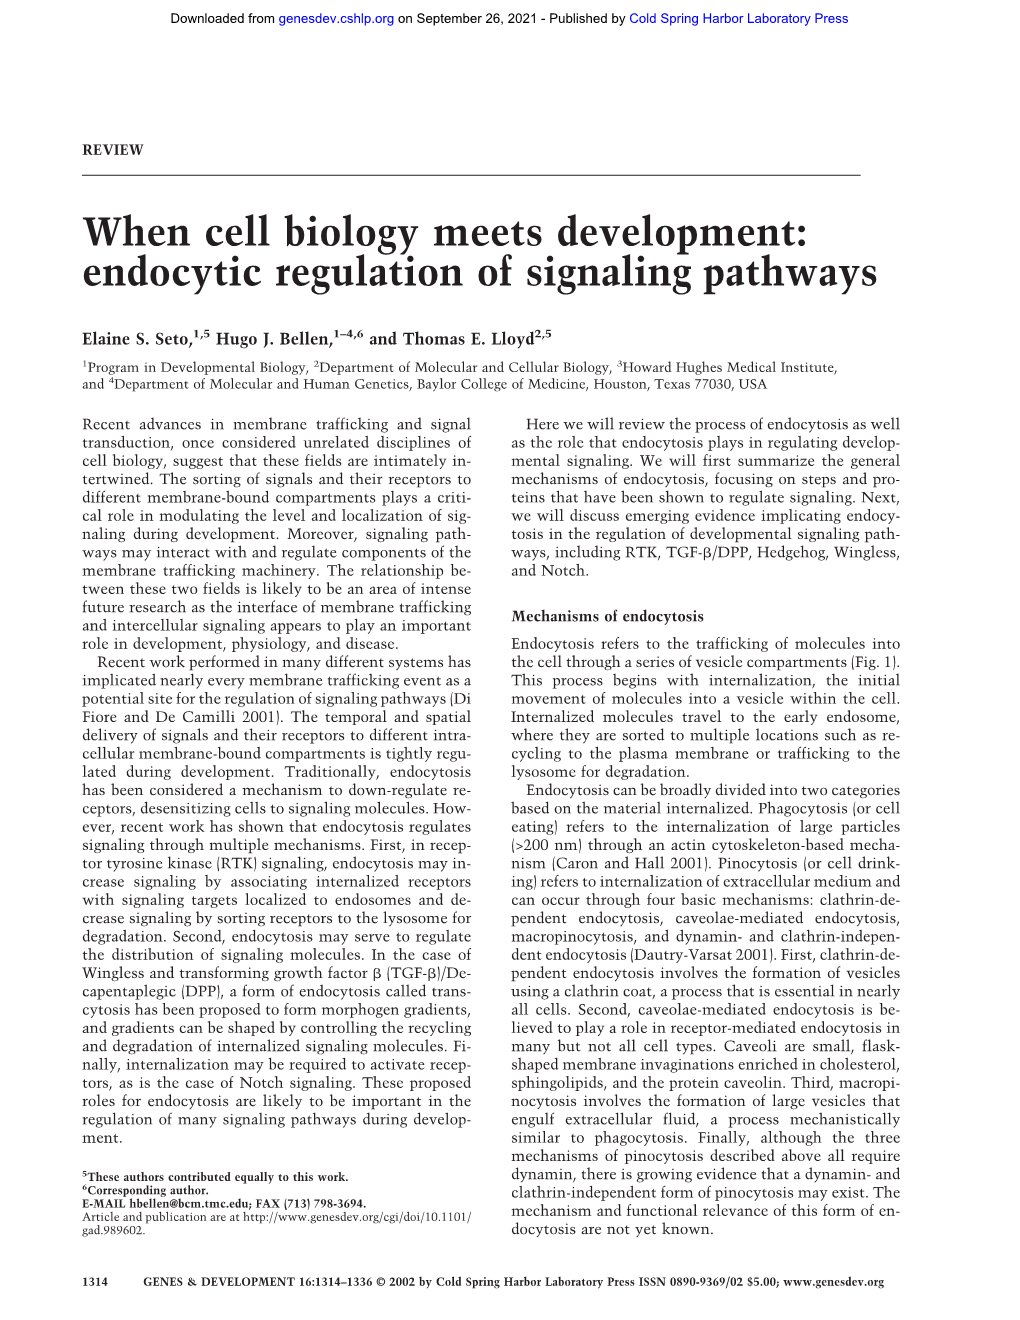 When Cell Biology Meets Development: Endocytic Regulation of Signaling Pathways